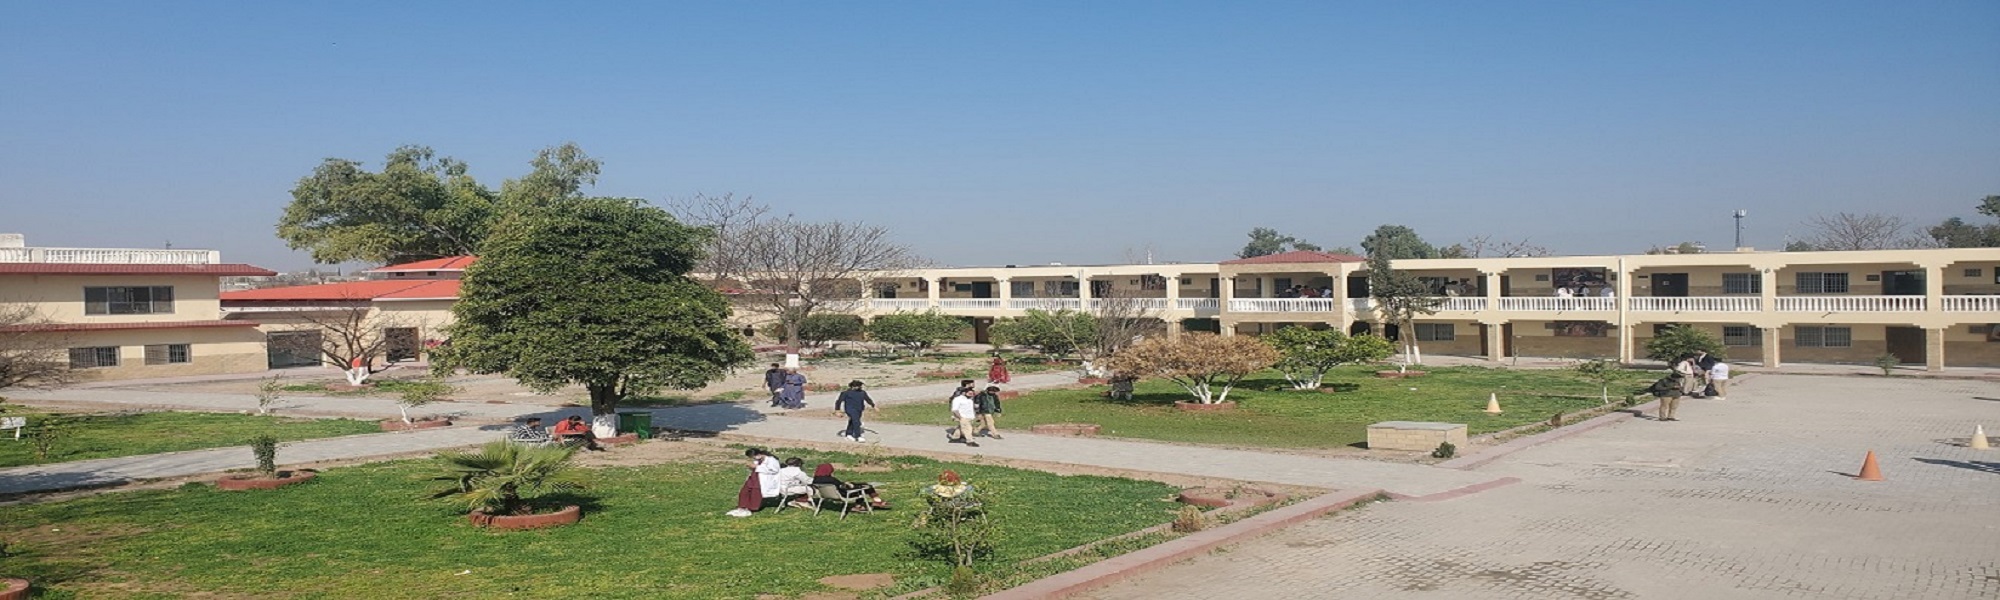 RIHS-college-building